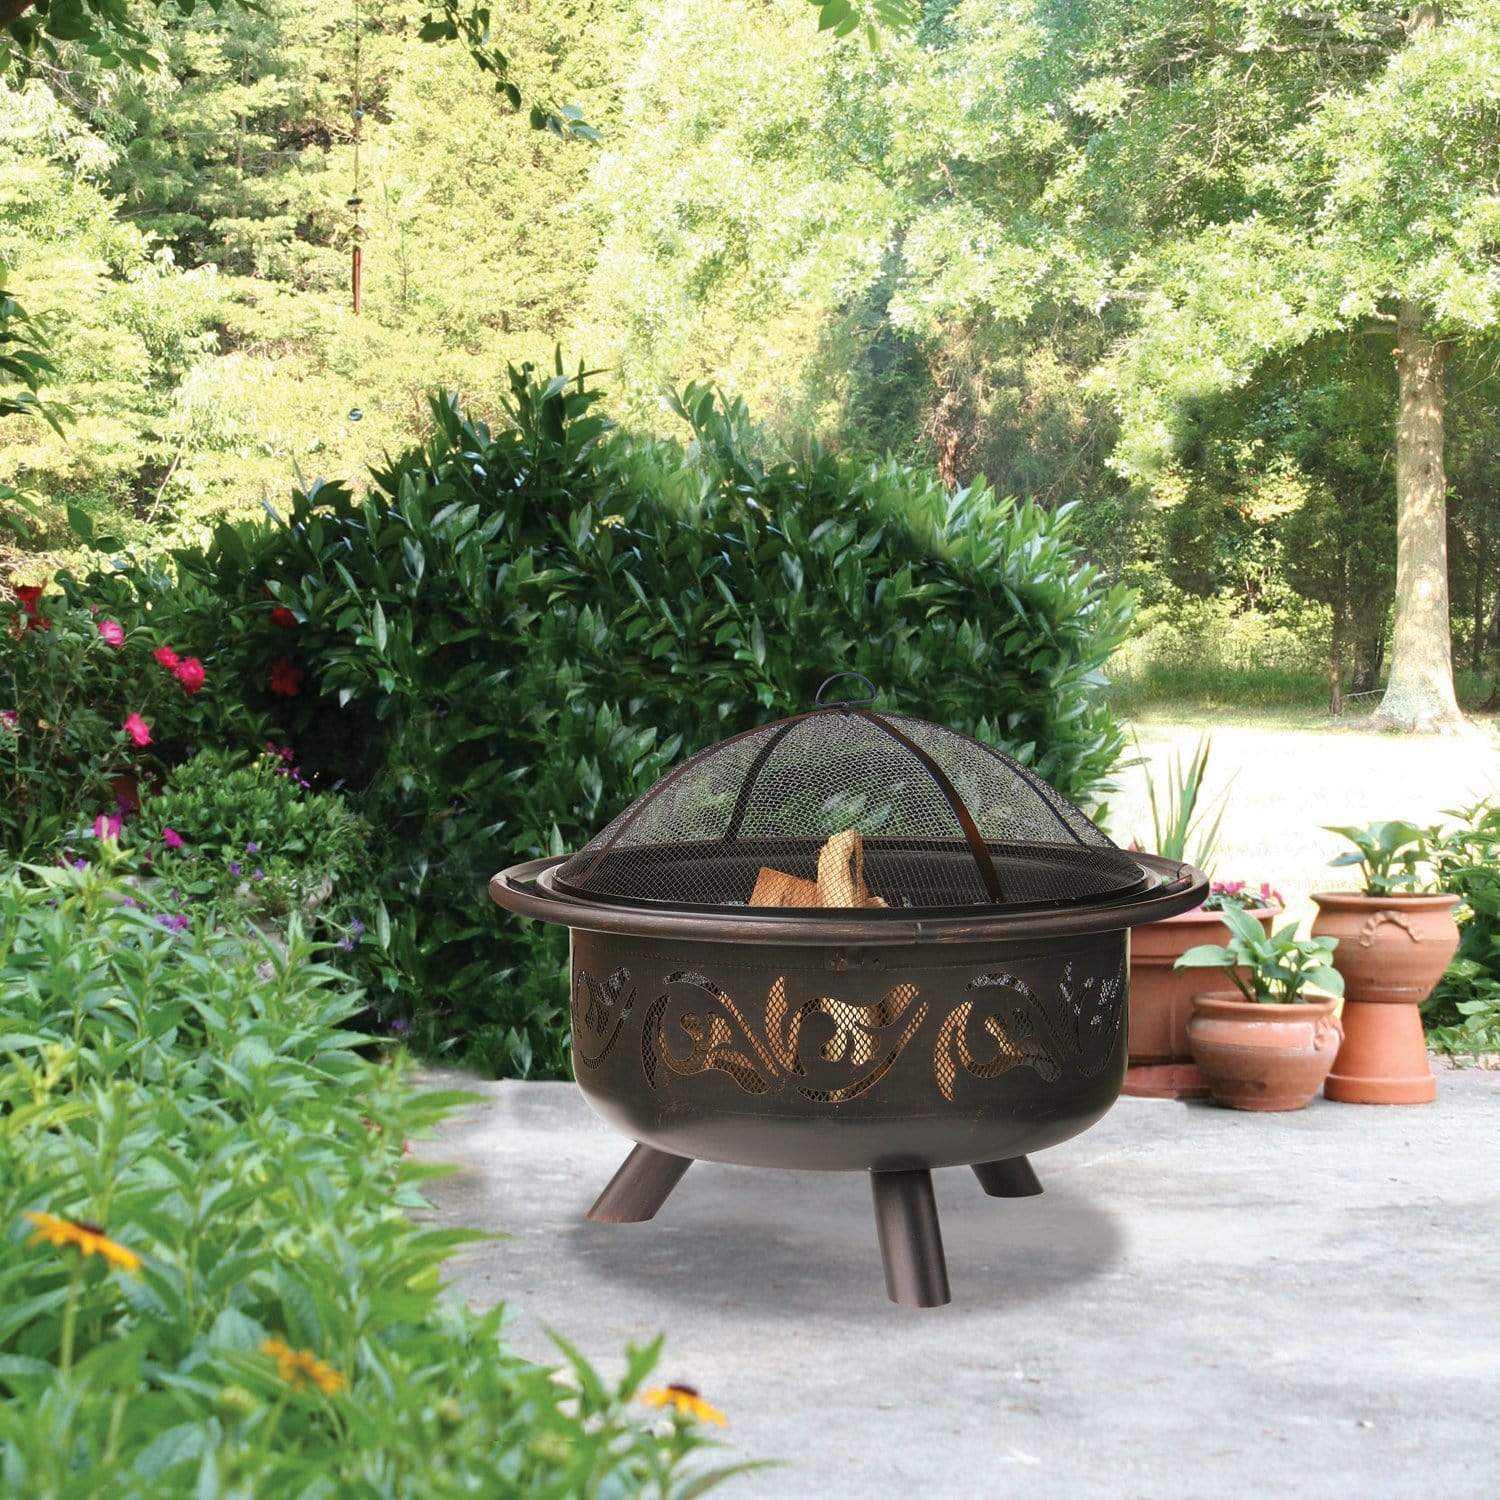 Endless Summer Fire Pit OIL RUBBED BRONZE WOOD FIREBOWL WITH SWIRL DESIGN